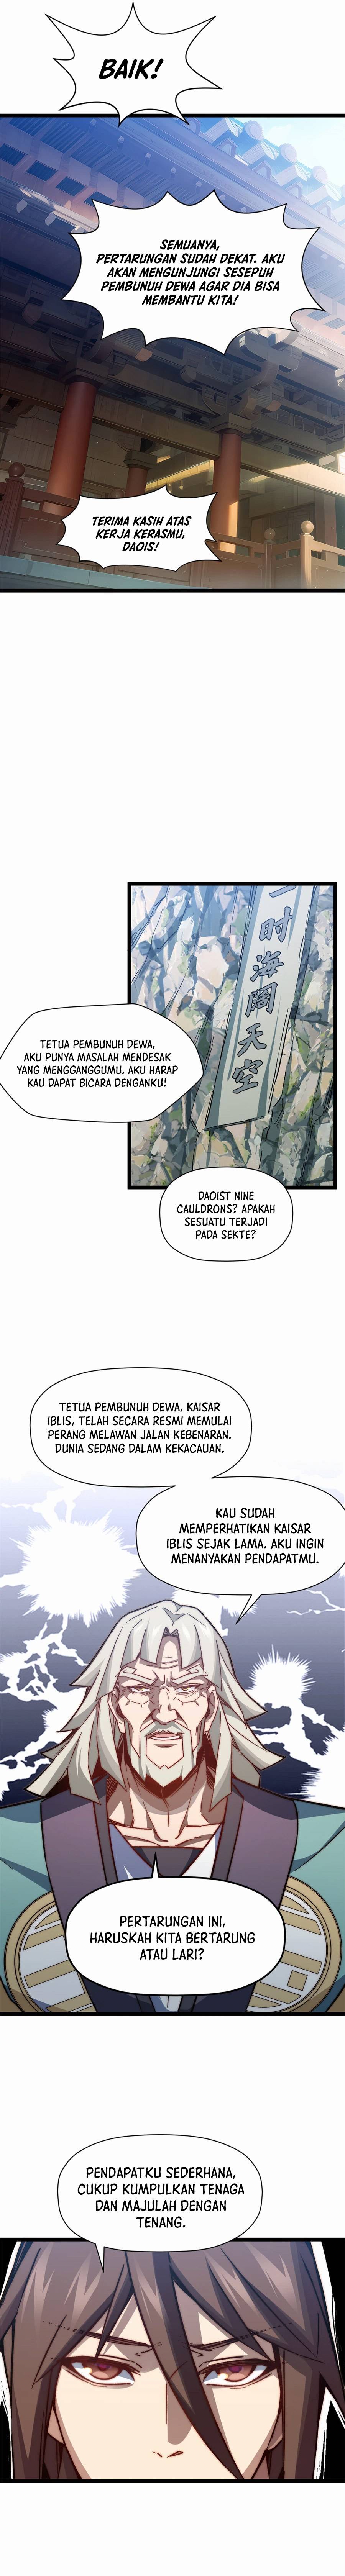 Dilarang COPAS - situs resmi www.mangacanblog.com - Komik top tier providence secretly cultivate for a thousand years 131 - chapter 131 132 Indonesia top tier providence secretly cultivate for a thousand years 131 - chapter 131 Terbaru 12|Baca Manga Komik Indonesia|Mangacan